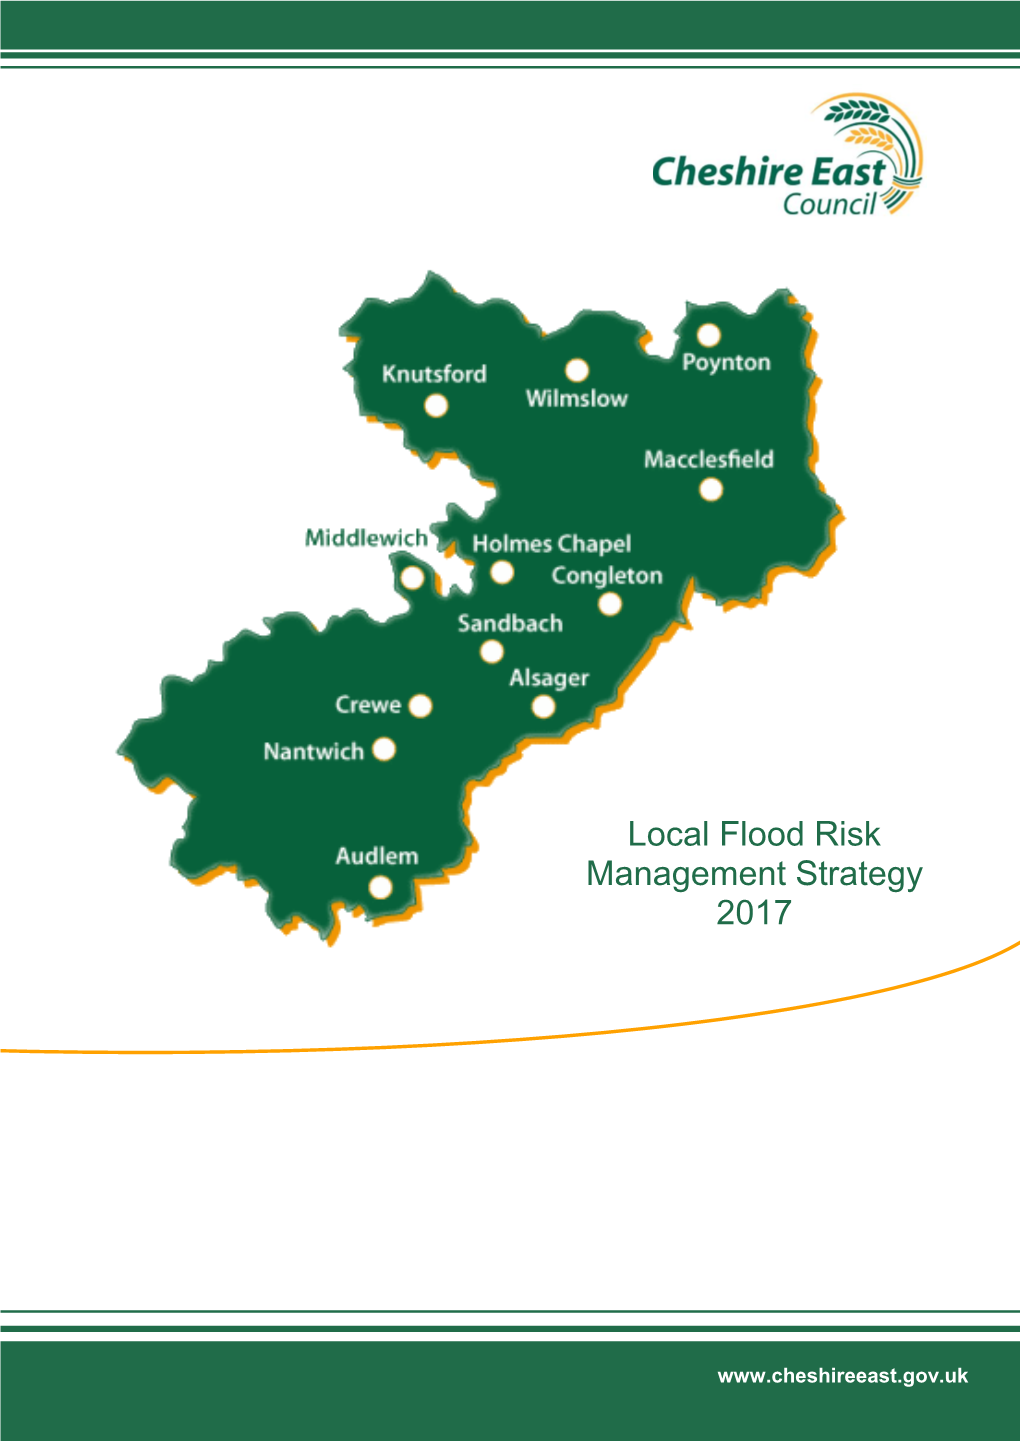 Local Flood Risk Management Strategy 2017